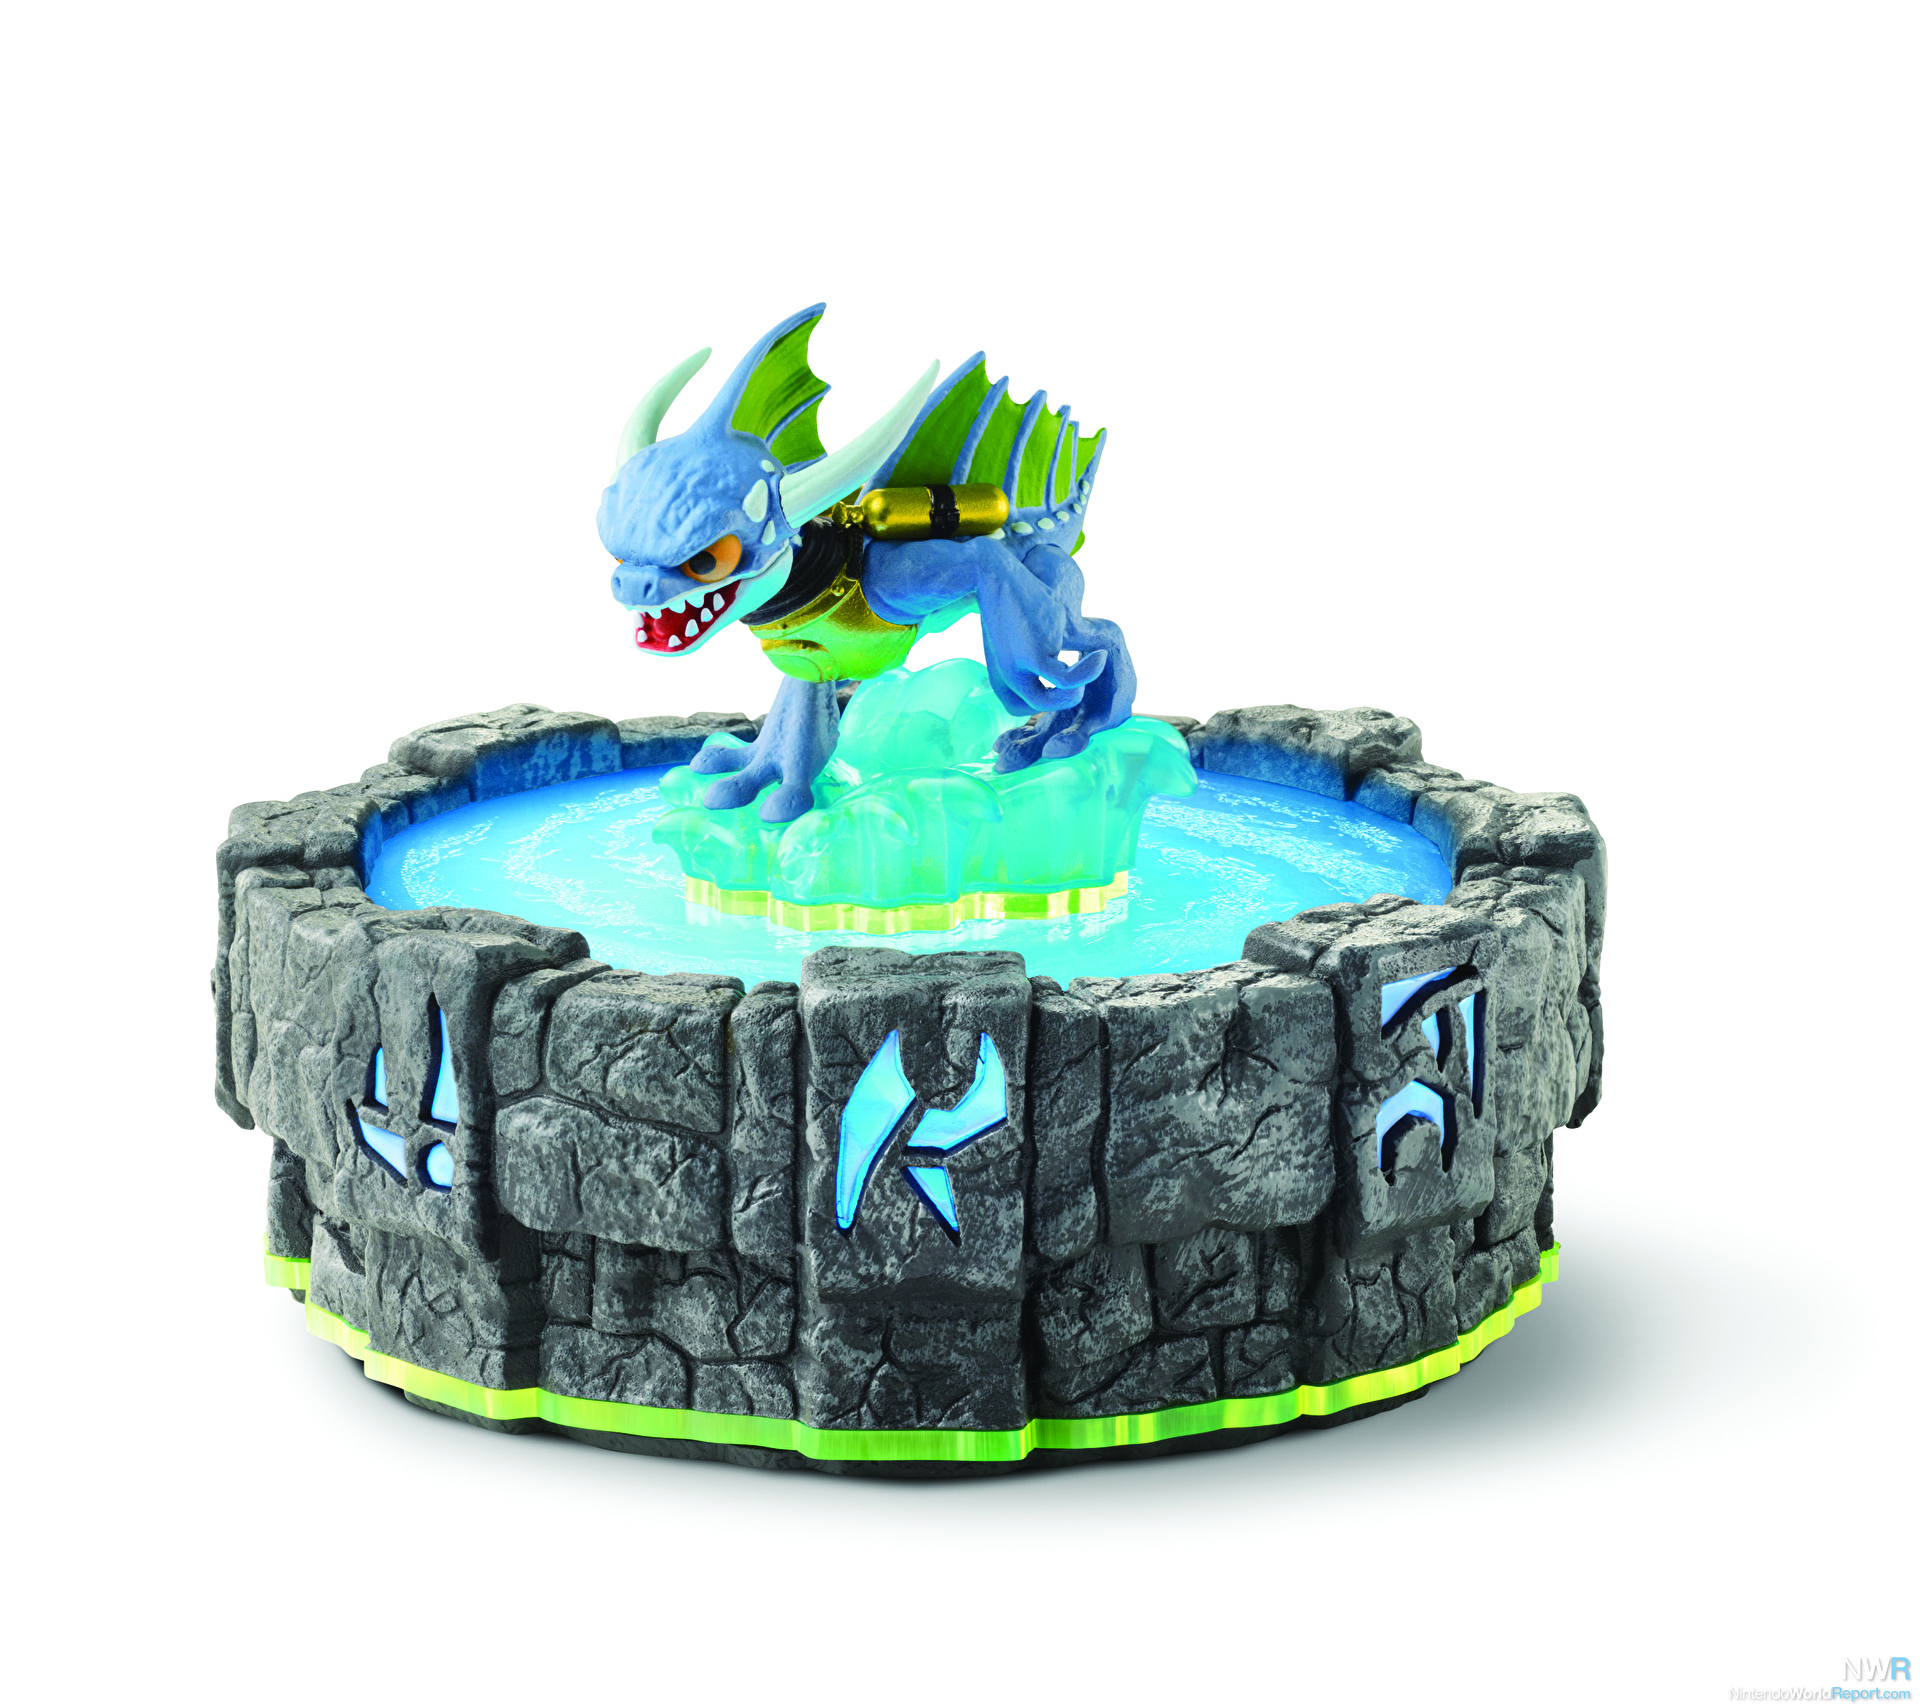 Water Element Characters From Spyro's Adventure.